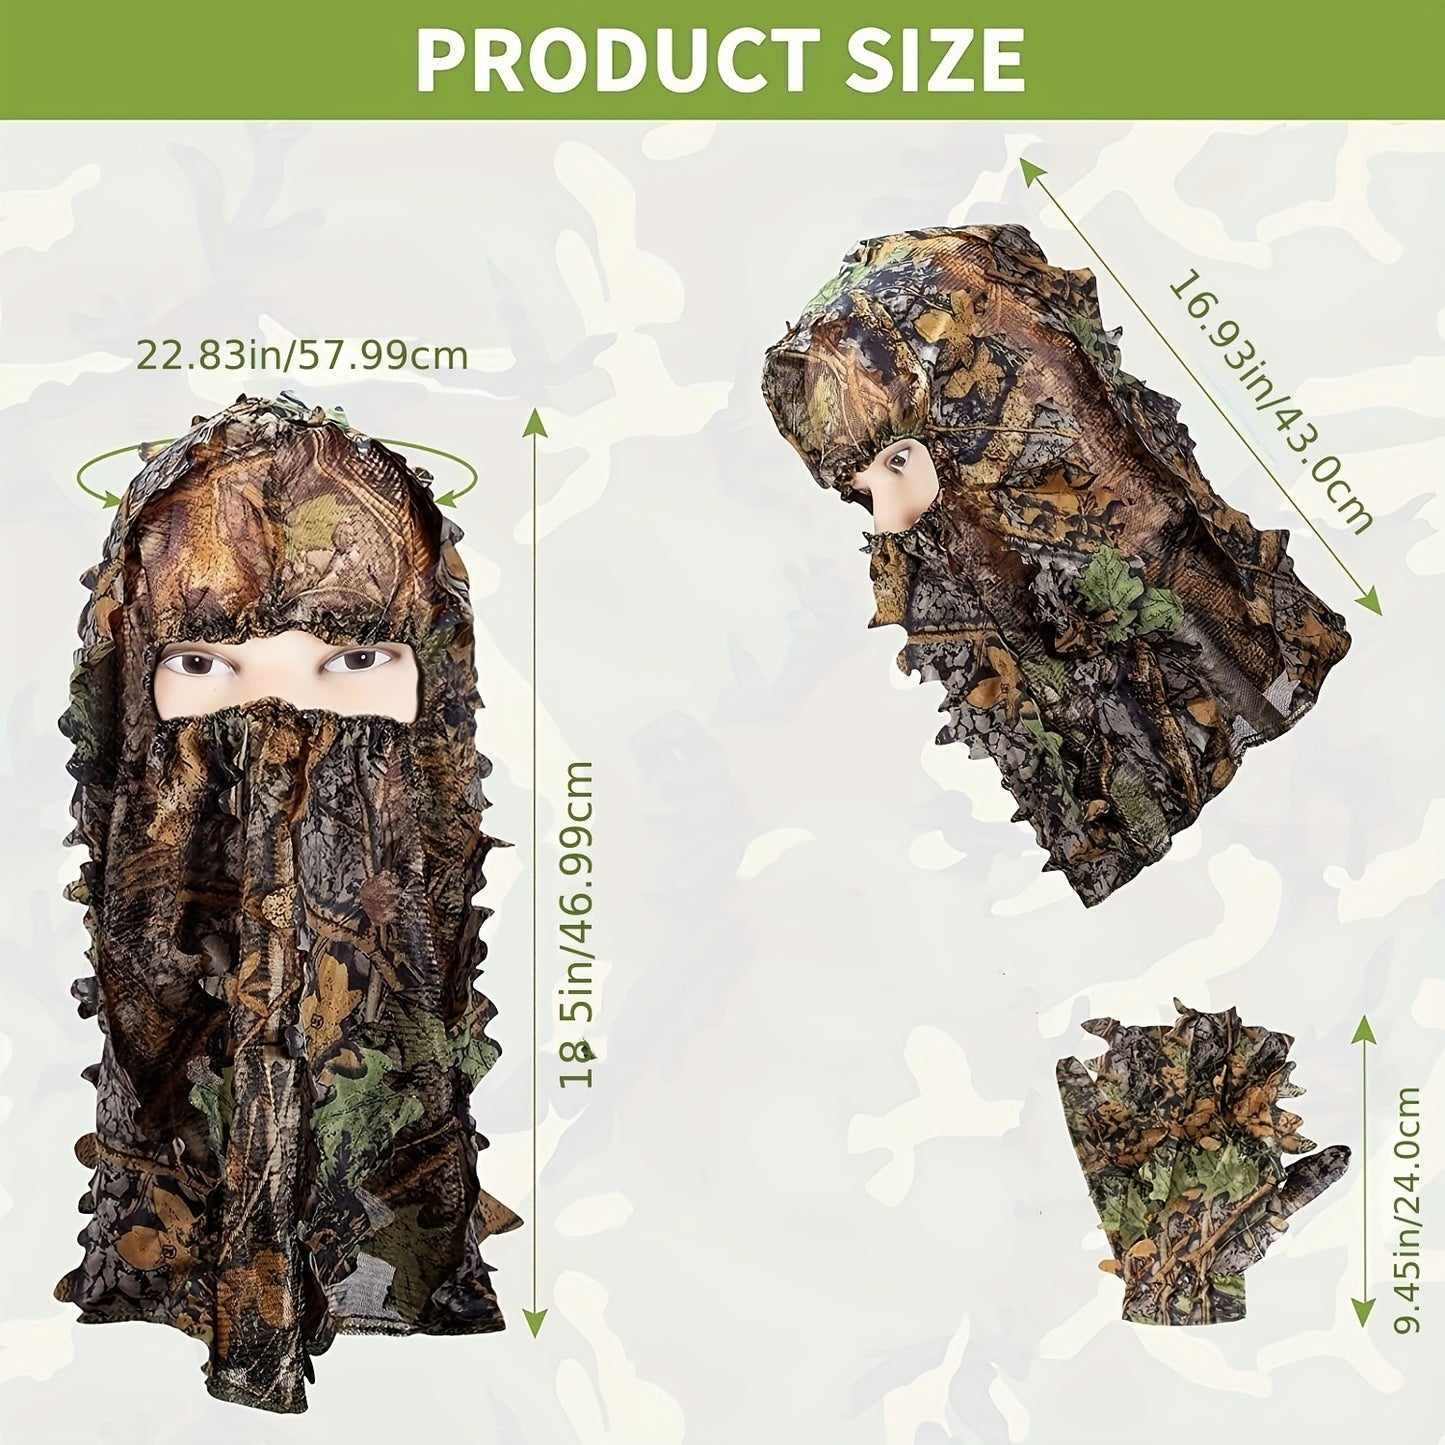 Breathable Camouflage Hunting Suit for Men - Lightweight and Hooded Wild Leafy Design